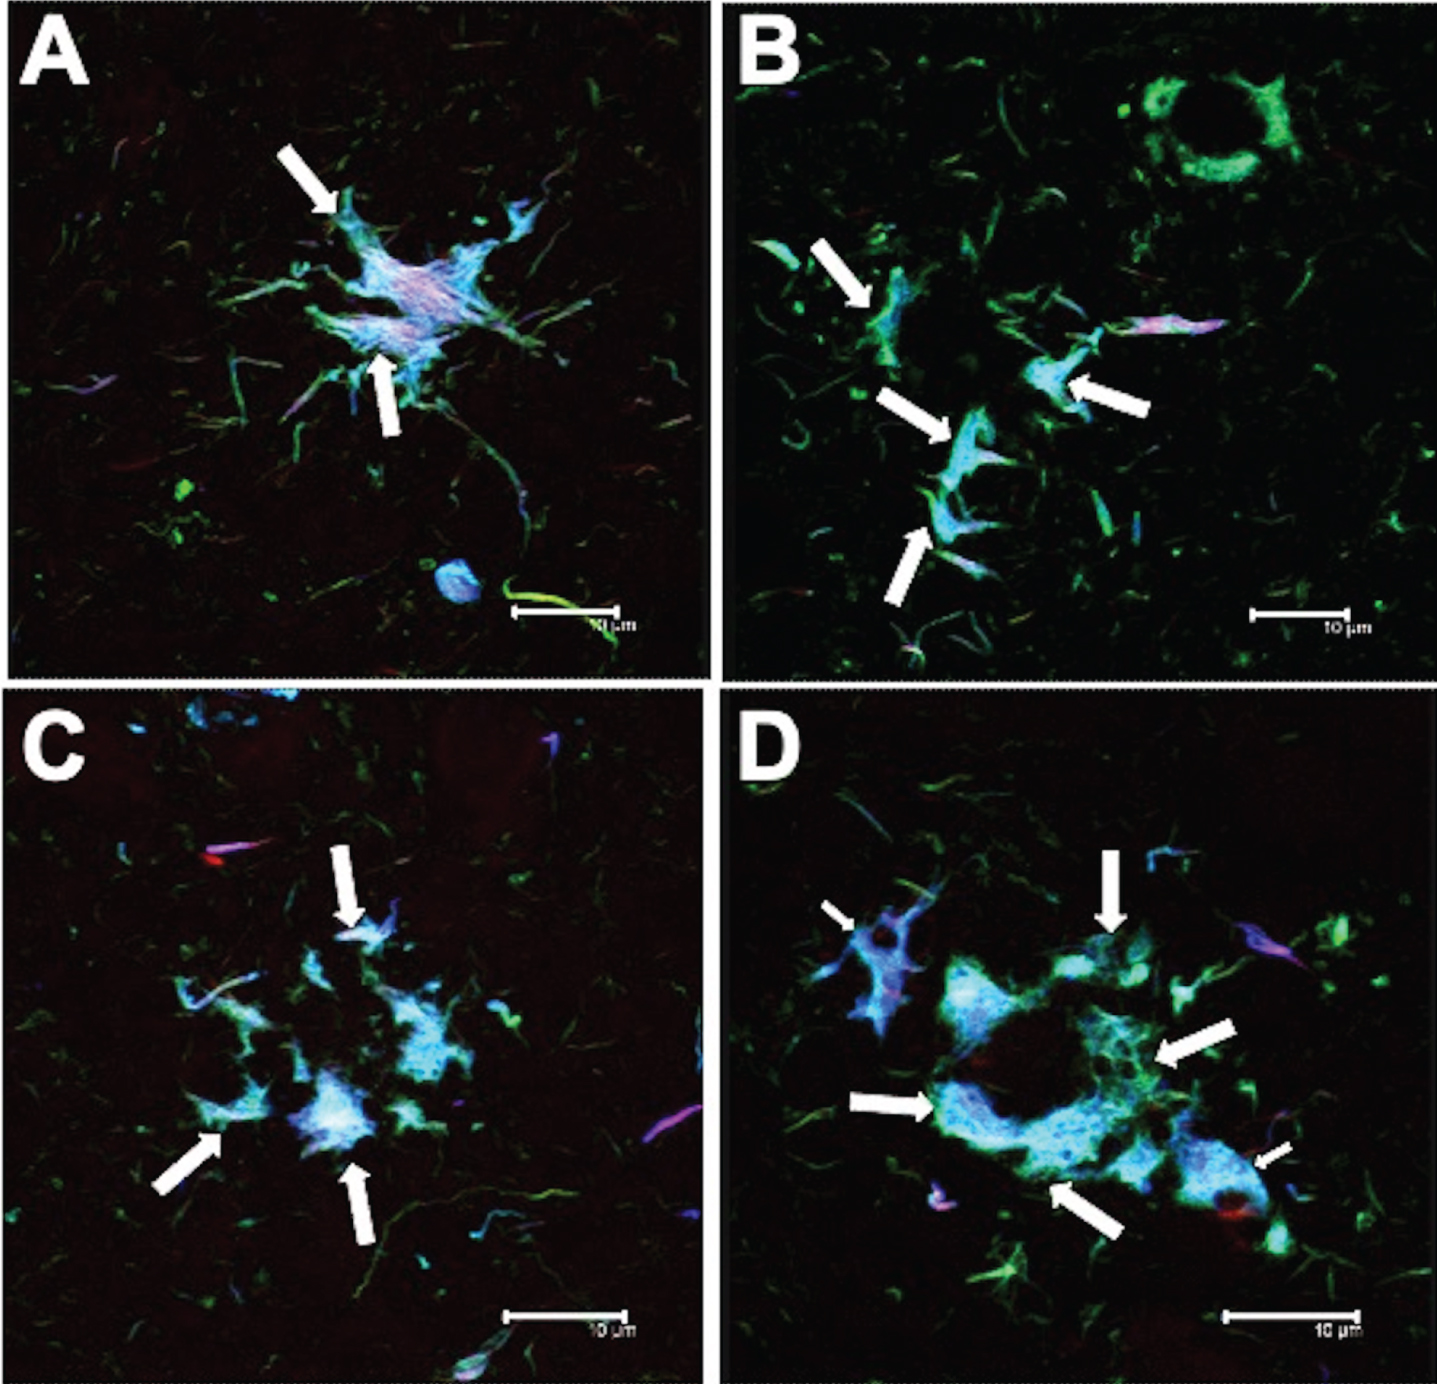 Different tau expression patterns in tufted astrocytes (TAs) in PSP. TAs were strongly recognized by AT8 and pS396 and colocalized with TR.